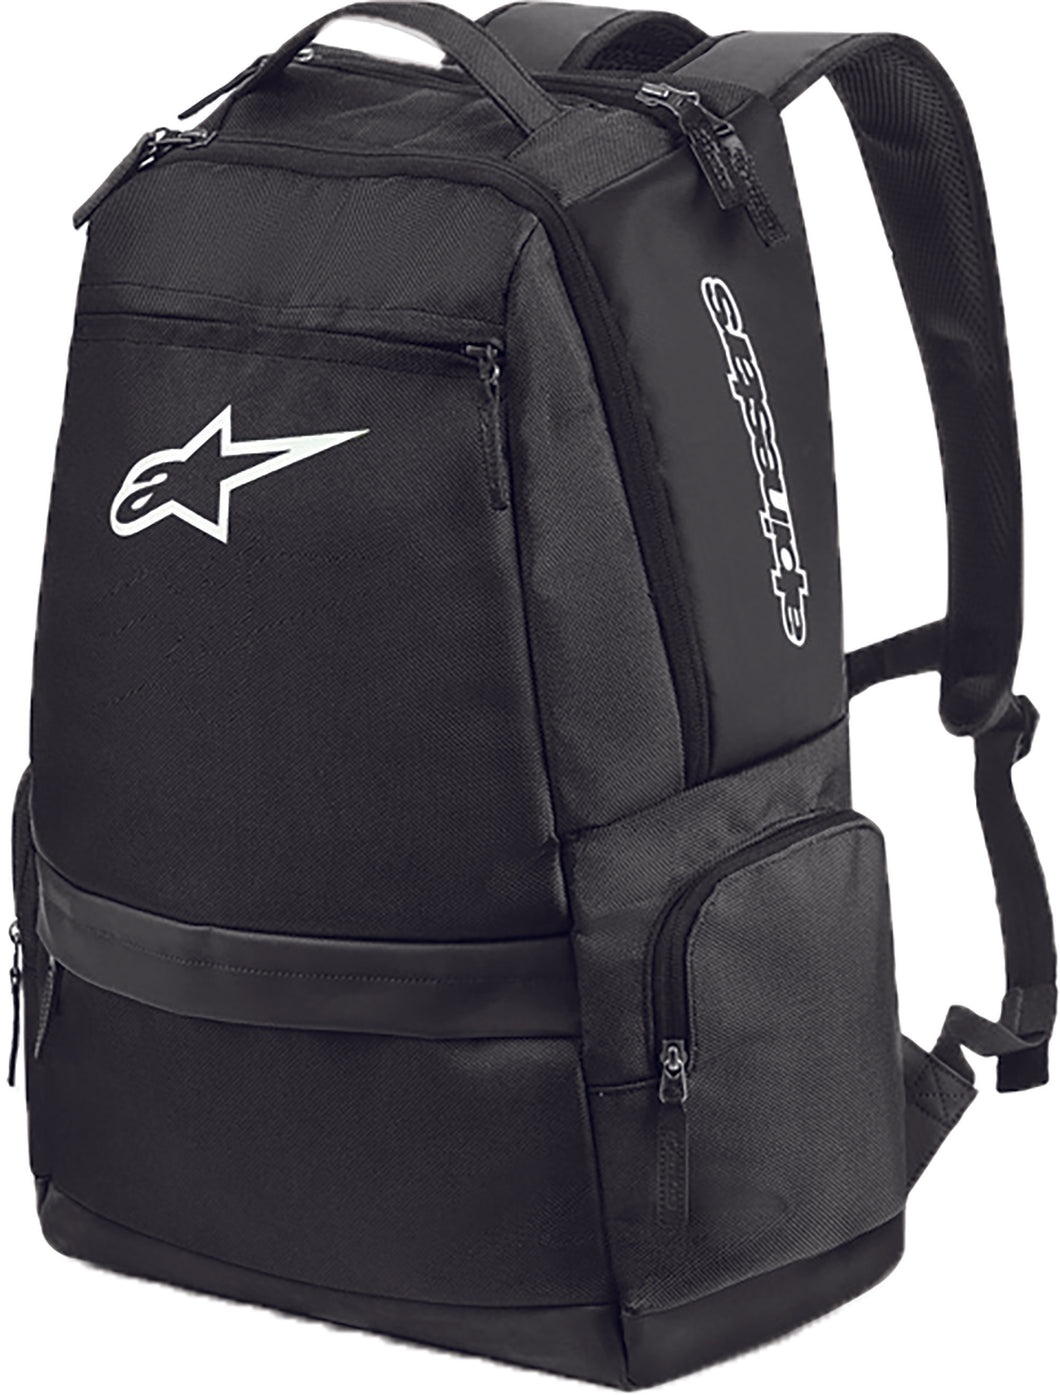 STANDBY BACKPACK BLACK